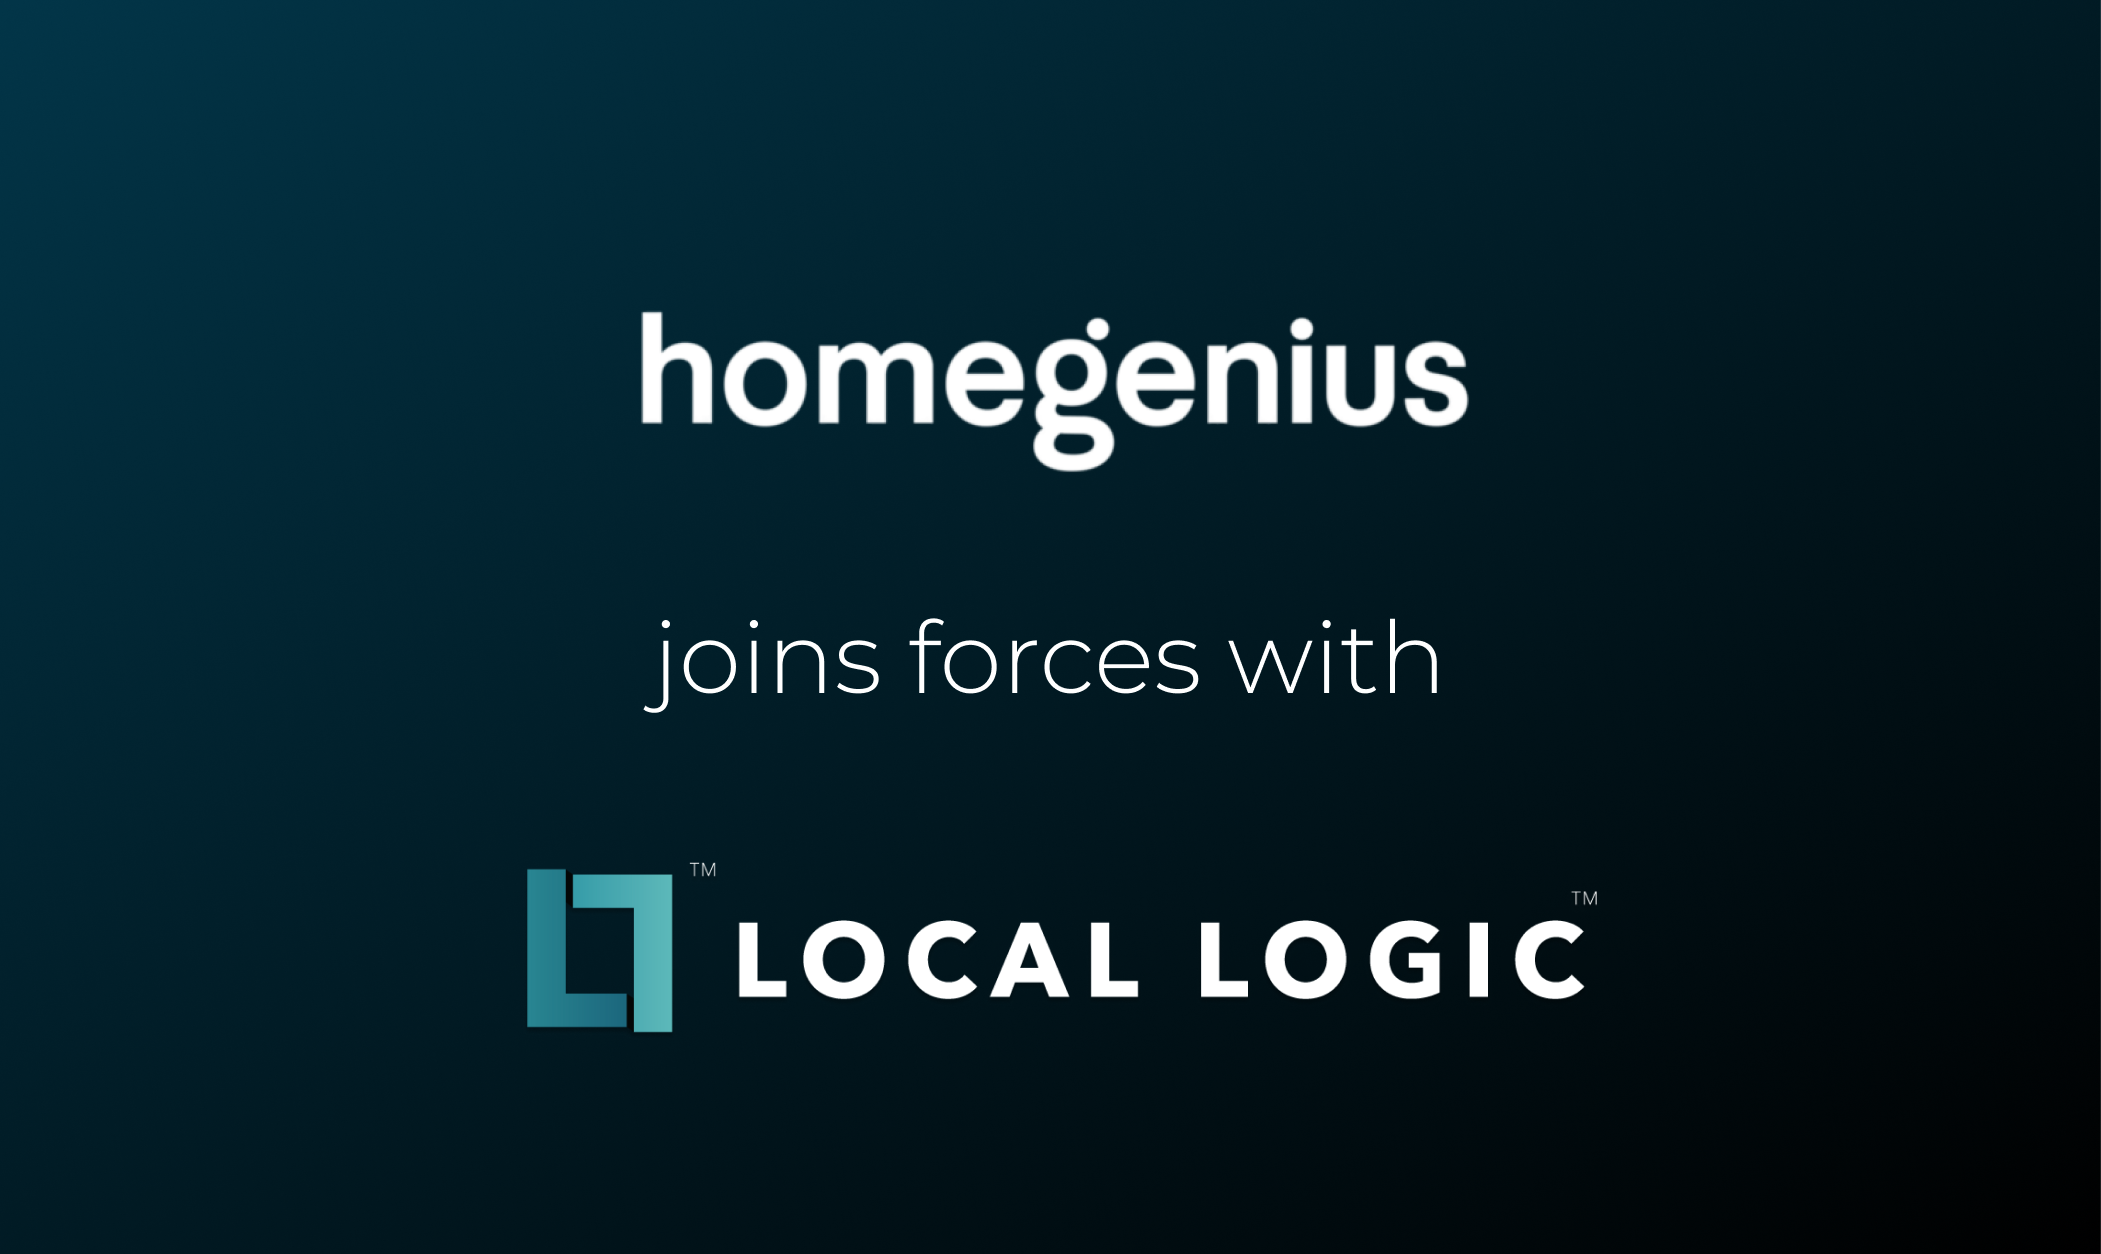 homegenius logo with local logic logo to announce partnership over a navy background